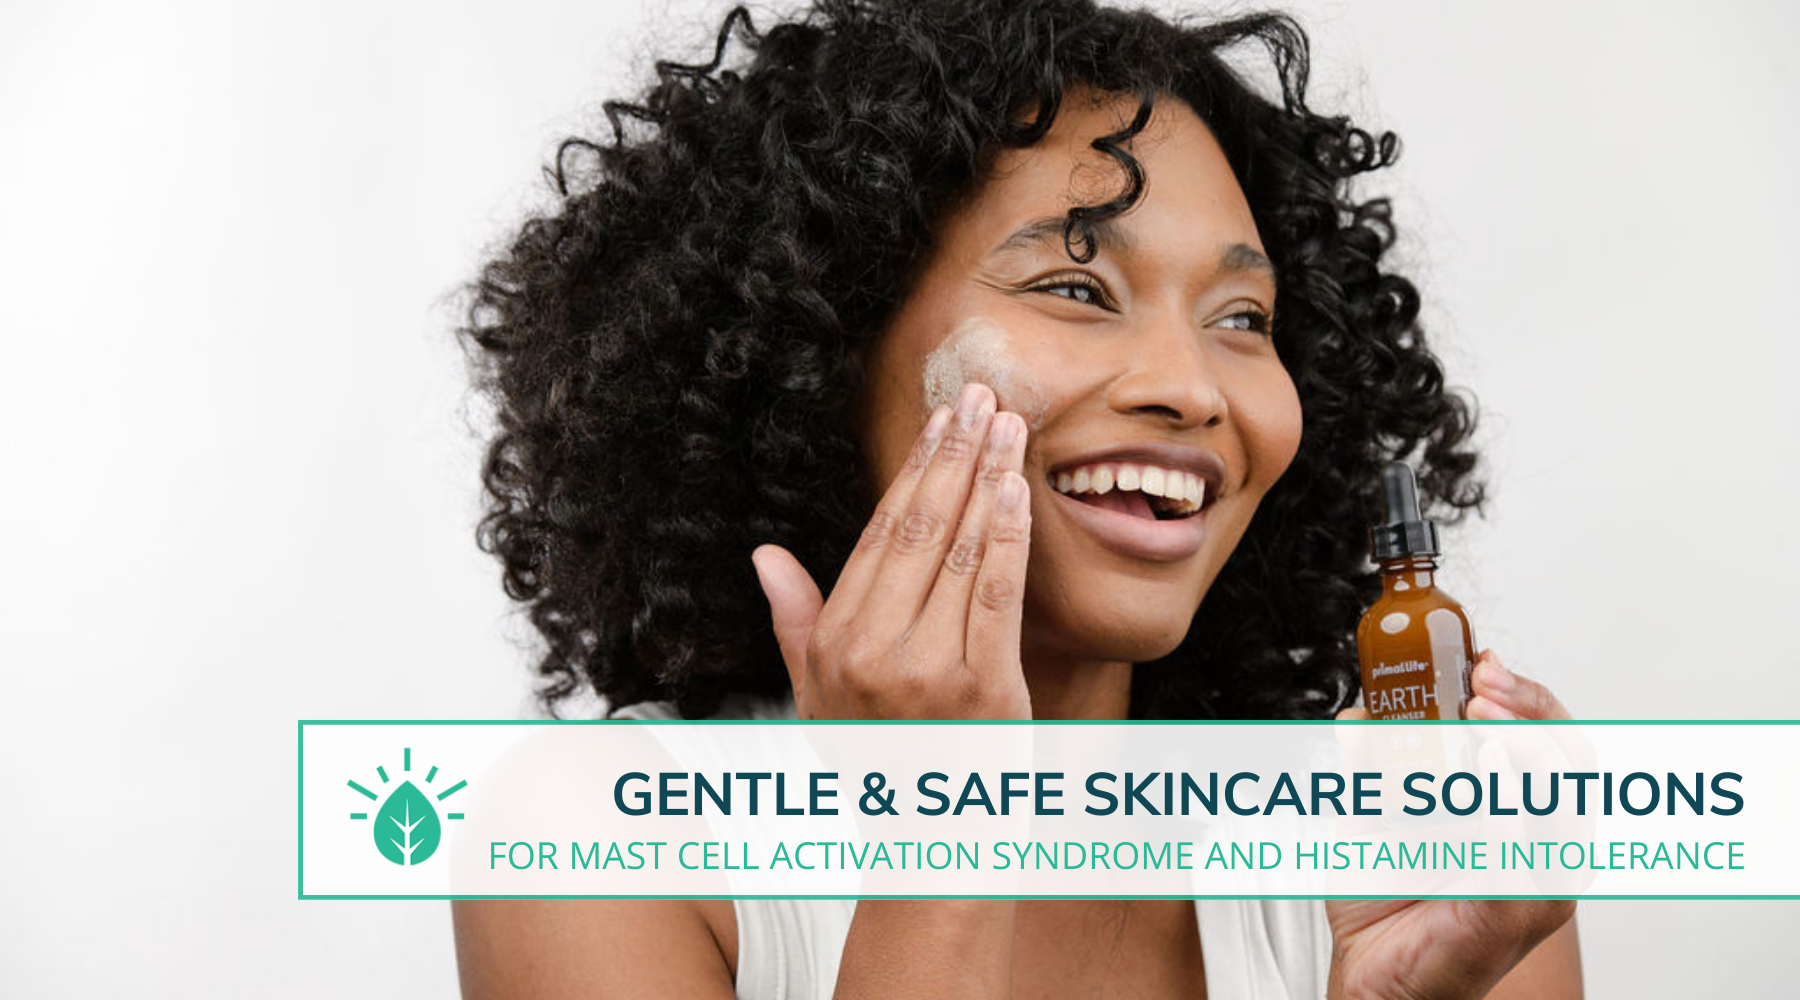 Gentle & Safe Skincare Solutions for Mast Cell Activation Syndrome and Histamine Intolerance